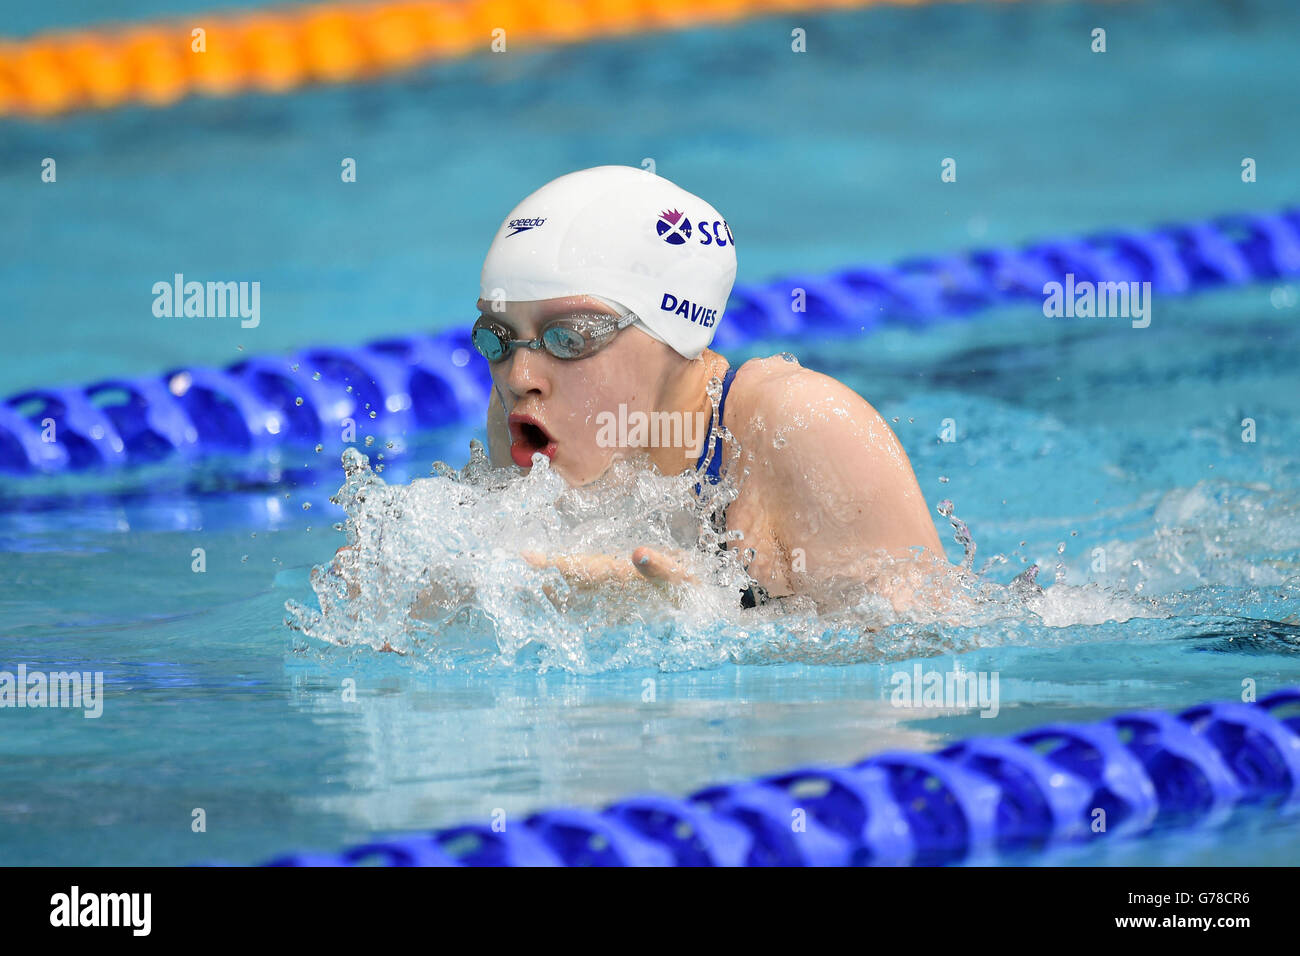 Scotland's Erraid Davies in the Women's Para-Sport 100m Breaststroke SB9 heats at Tollcross Swimming Centre, during the 2014 Commonwealth Games in Glasgow. Stock Photo